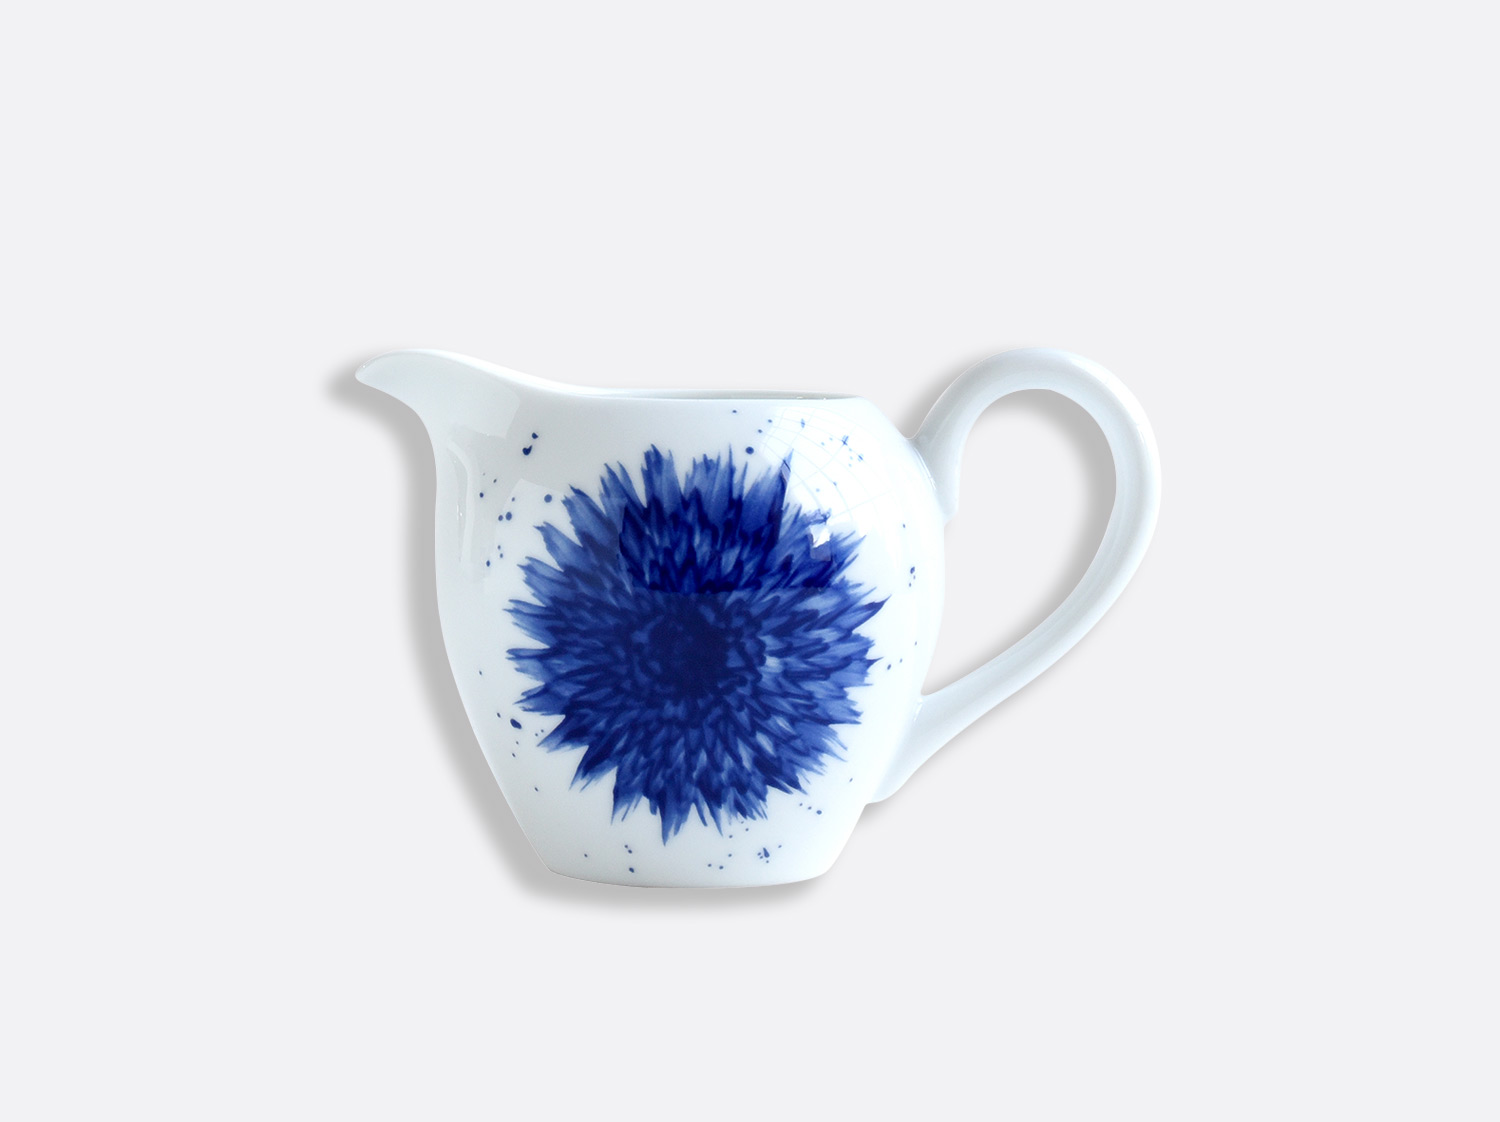 China Creamer of the collection IN BLOOM - Zemer Peled | Bernardaud